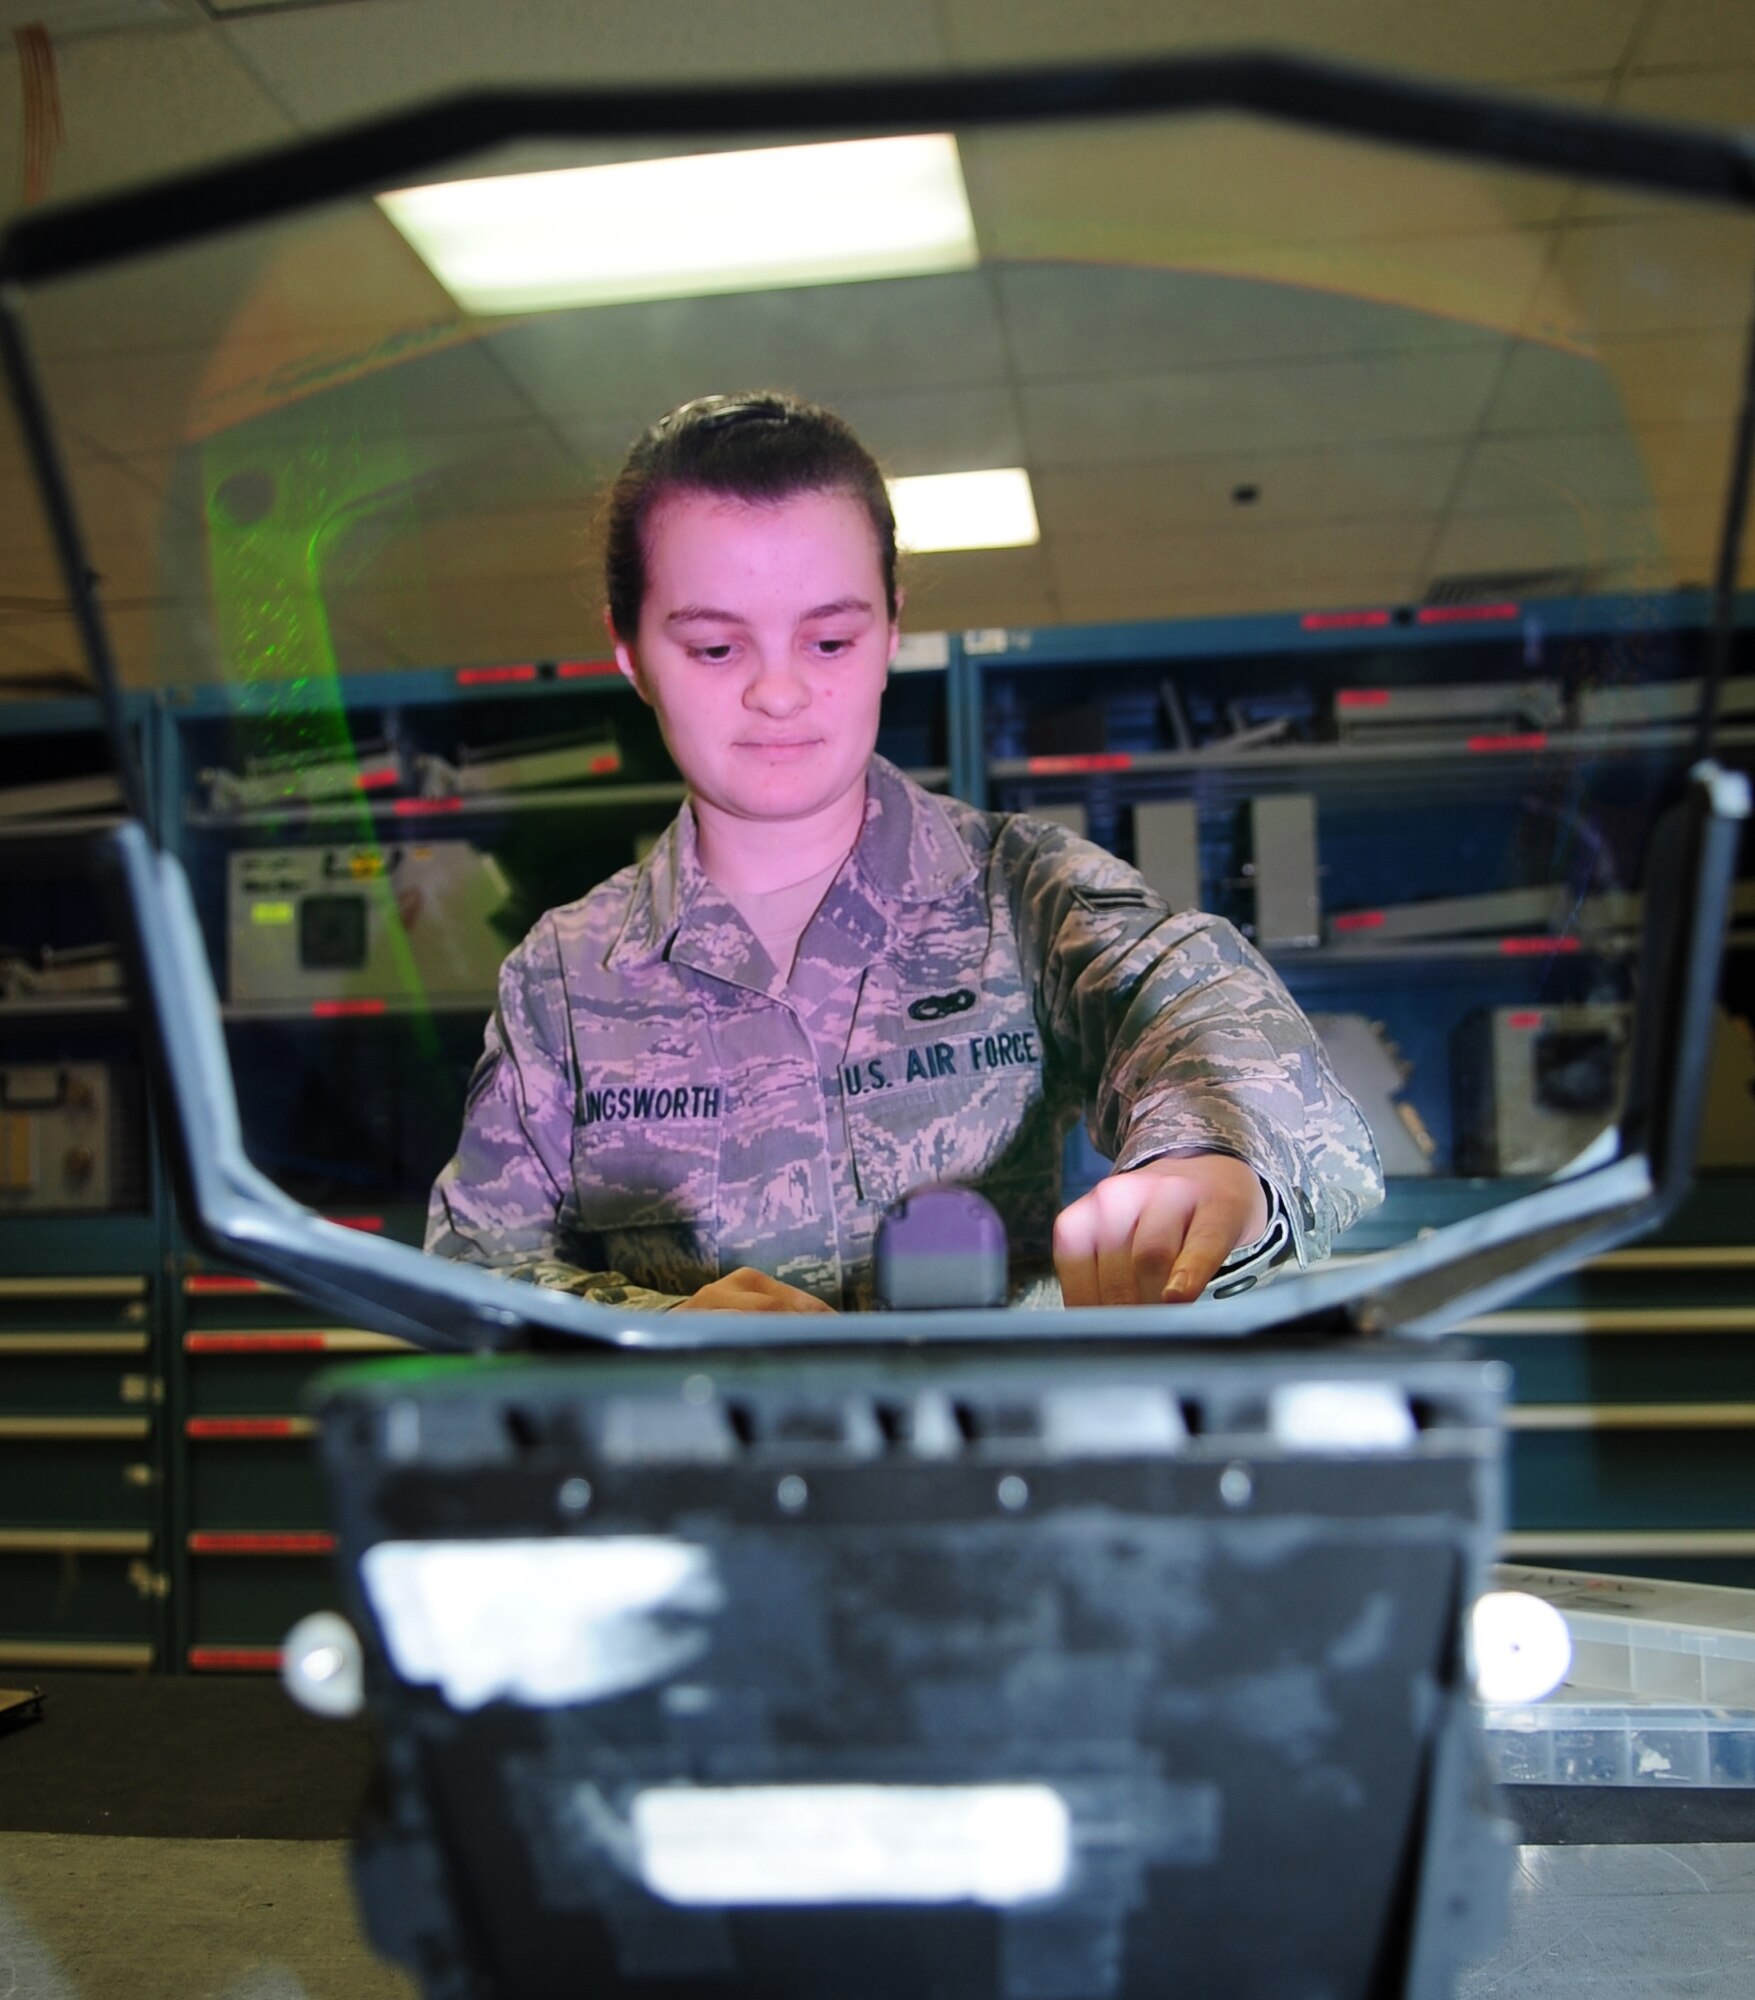 Airman 1st Class April Hollingsworth, 4th Component Maintenance Squadron, repairs the wiring in a heads-up display for an F-15E Strike Eagle at Seymour Johnson Air Force Base, N.C., March 10, 2009. The heads-up display provides a visual interface for the pilot. (U.S. Air Force photo by Airman 1st Class Rae Perry)